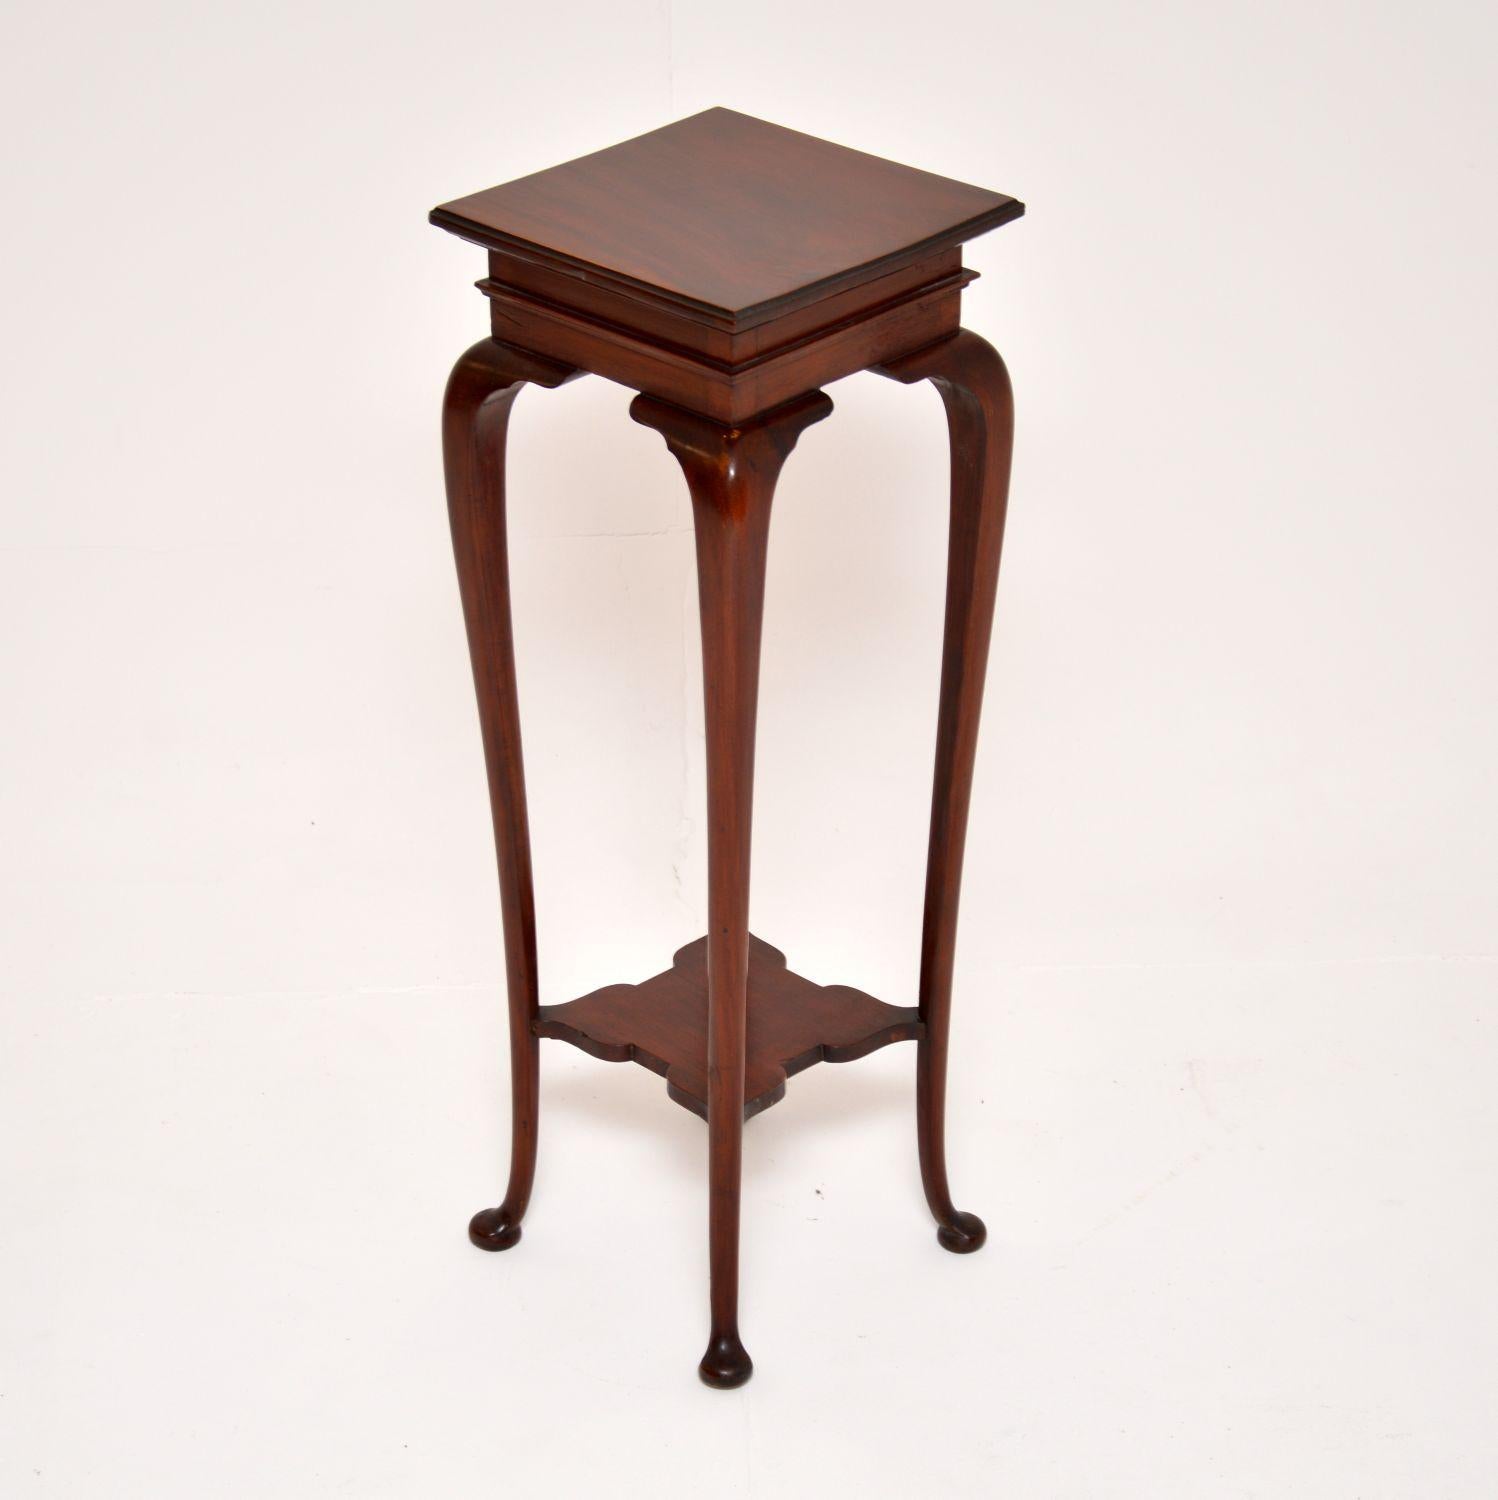 A beautiful and extremely well made antique Edwardian side table. This was made in England, it dates from around the 1900-1910 period.

It is of amazing quality, very sturdy yet elegant as well. The wood has a gorgeous colour tone and patina, this